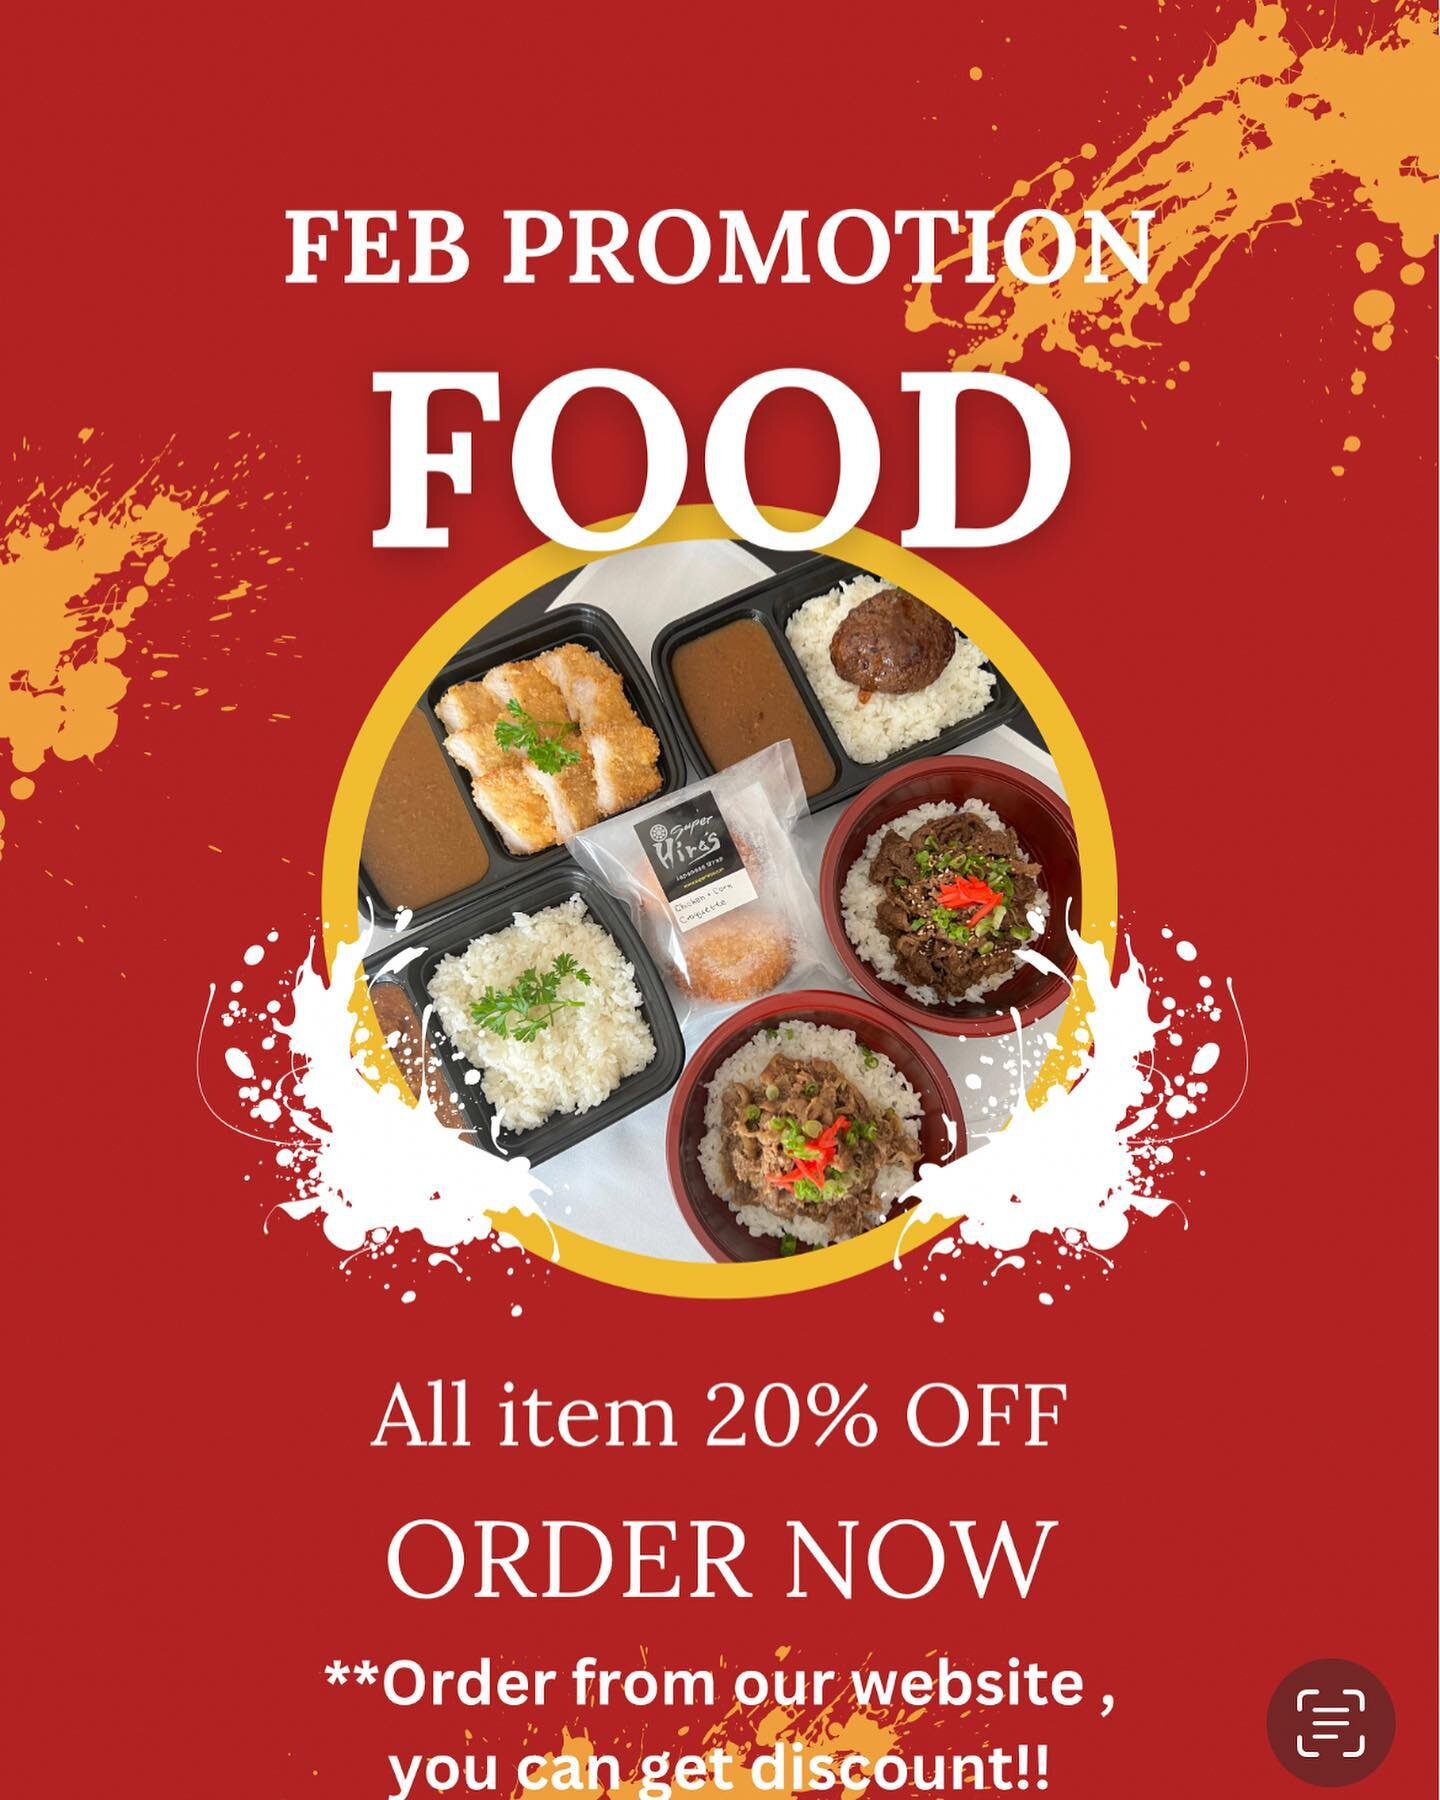 When you order our food from our website you get all 20% off!
Let&rsquo;s go to our website!
&bull;
&bull;
&bull;
&bull;
&bull;
#japanesefoods#onlineorder #local #japanesecurry #donburi#oishii